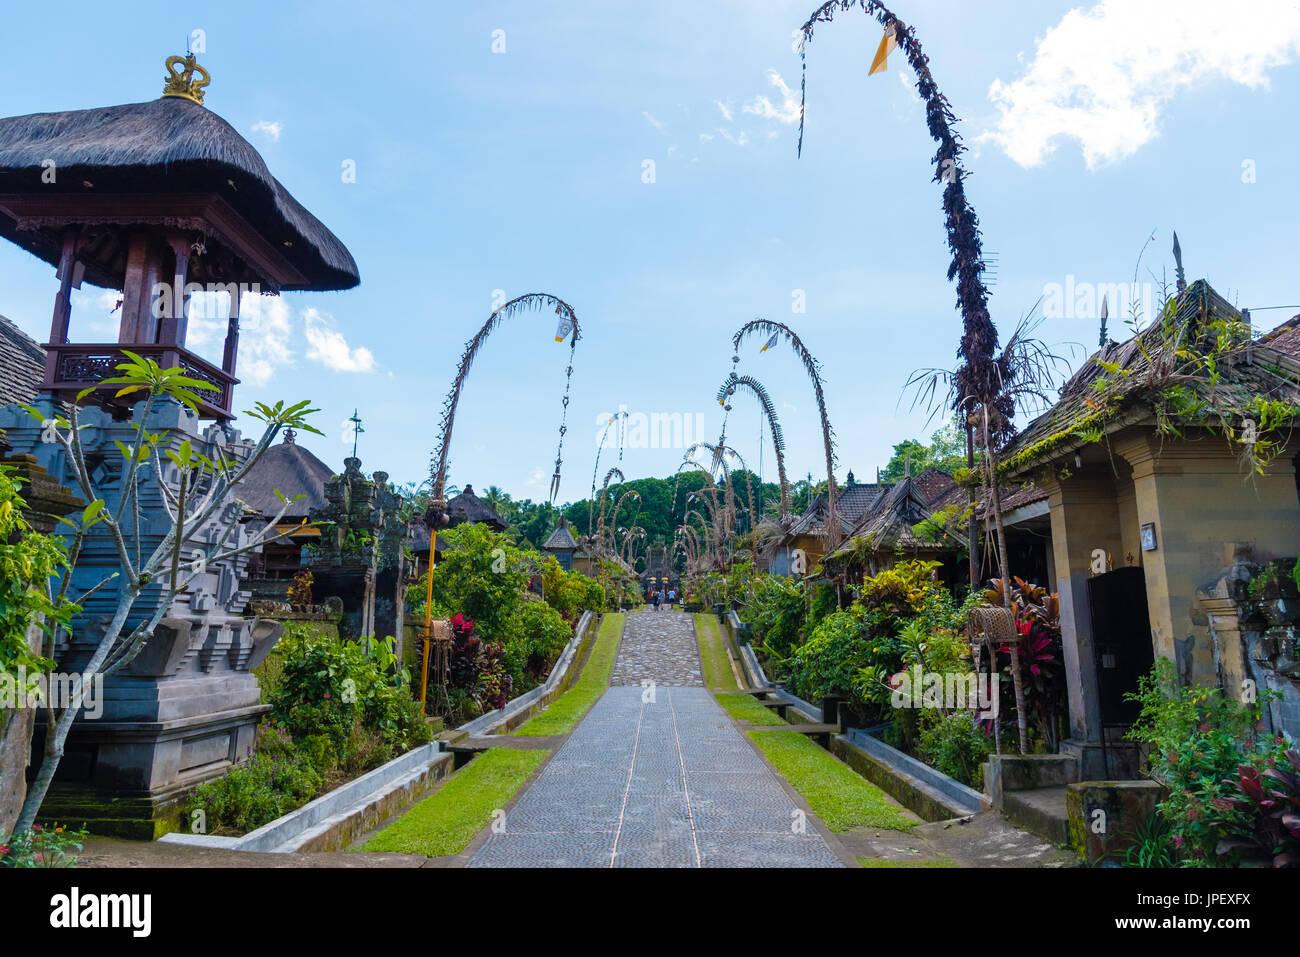 Bali, Indonesia - May 9, 2017 : Penglipuran village, best known for its well-preserved culture and village layout with traditional houses in Bali, Ind Stock Photo